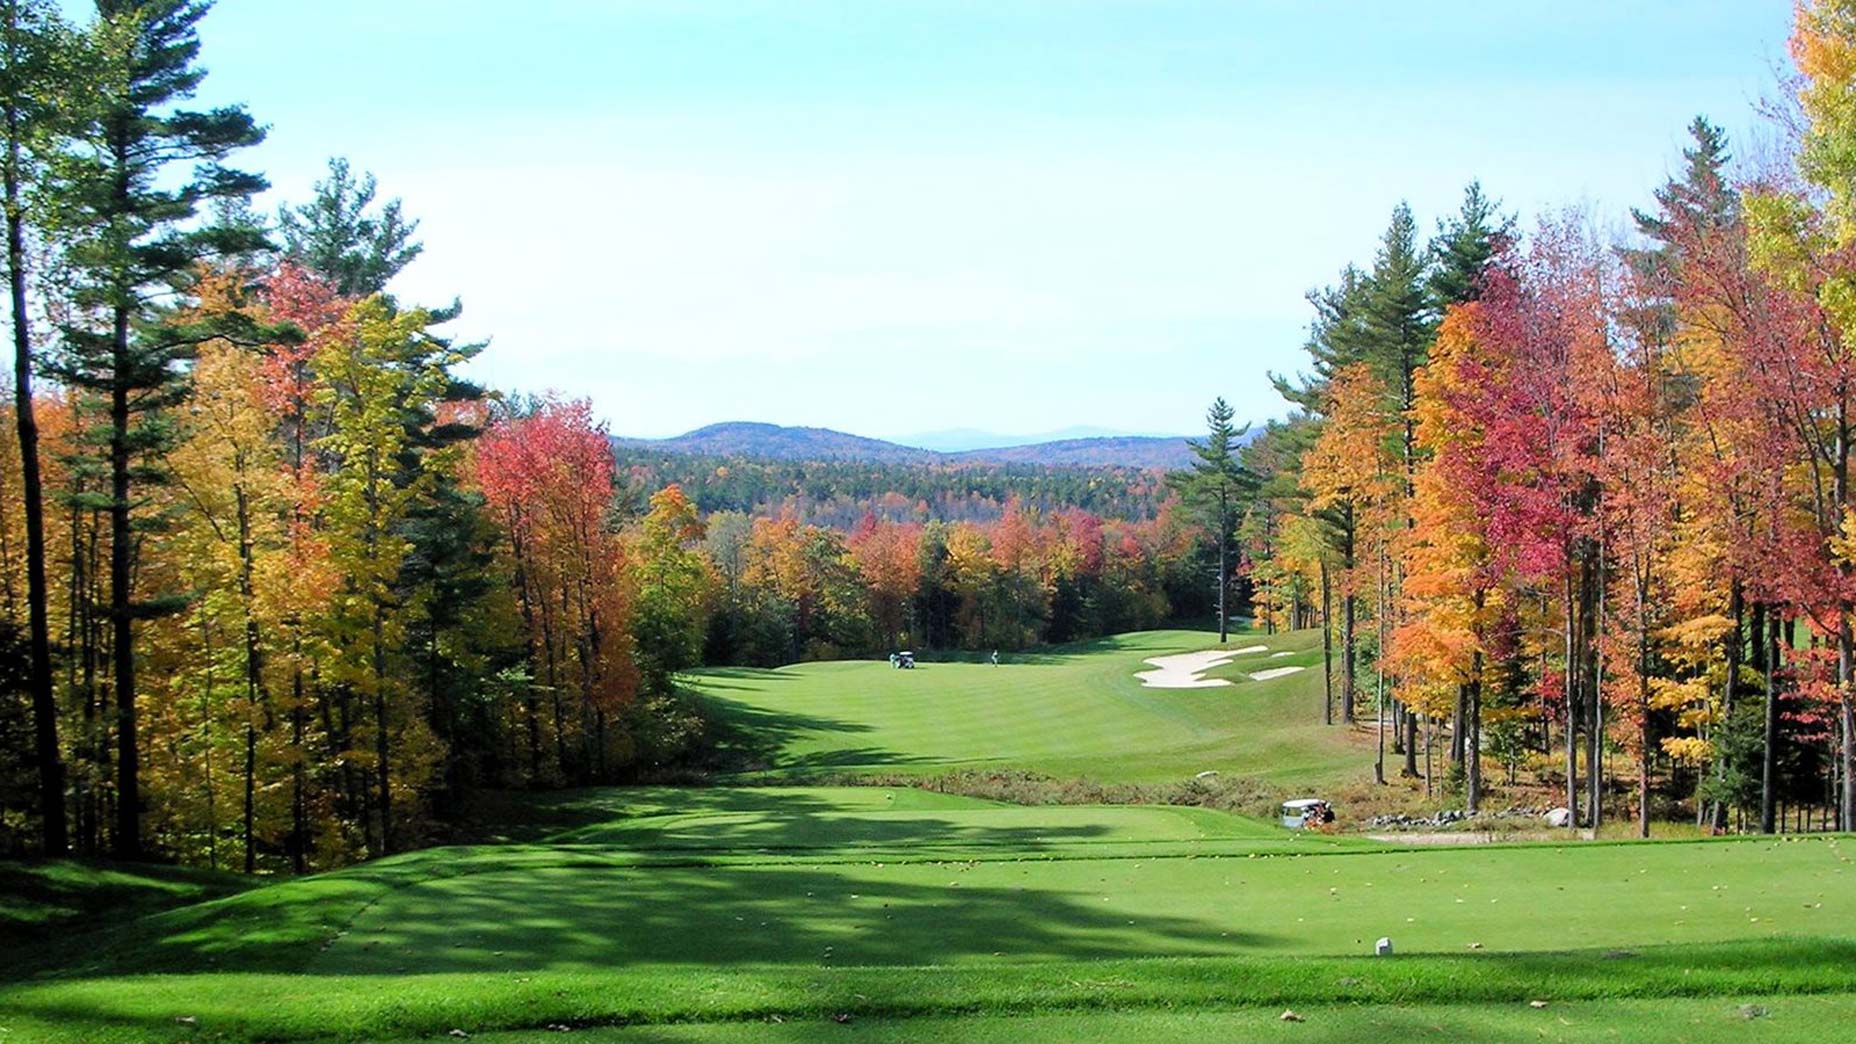 Best golf courses in New Hampshire, according to GOLF Magazine’s expert course raters